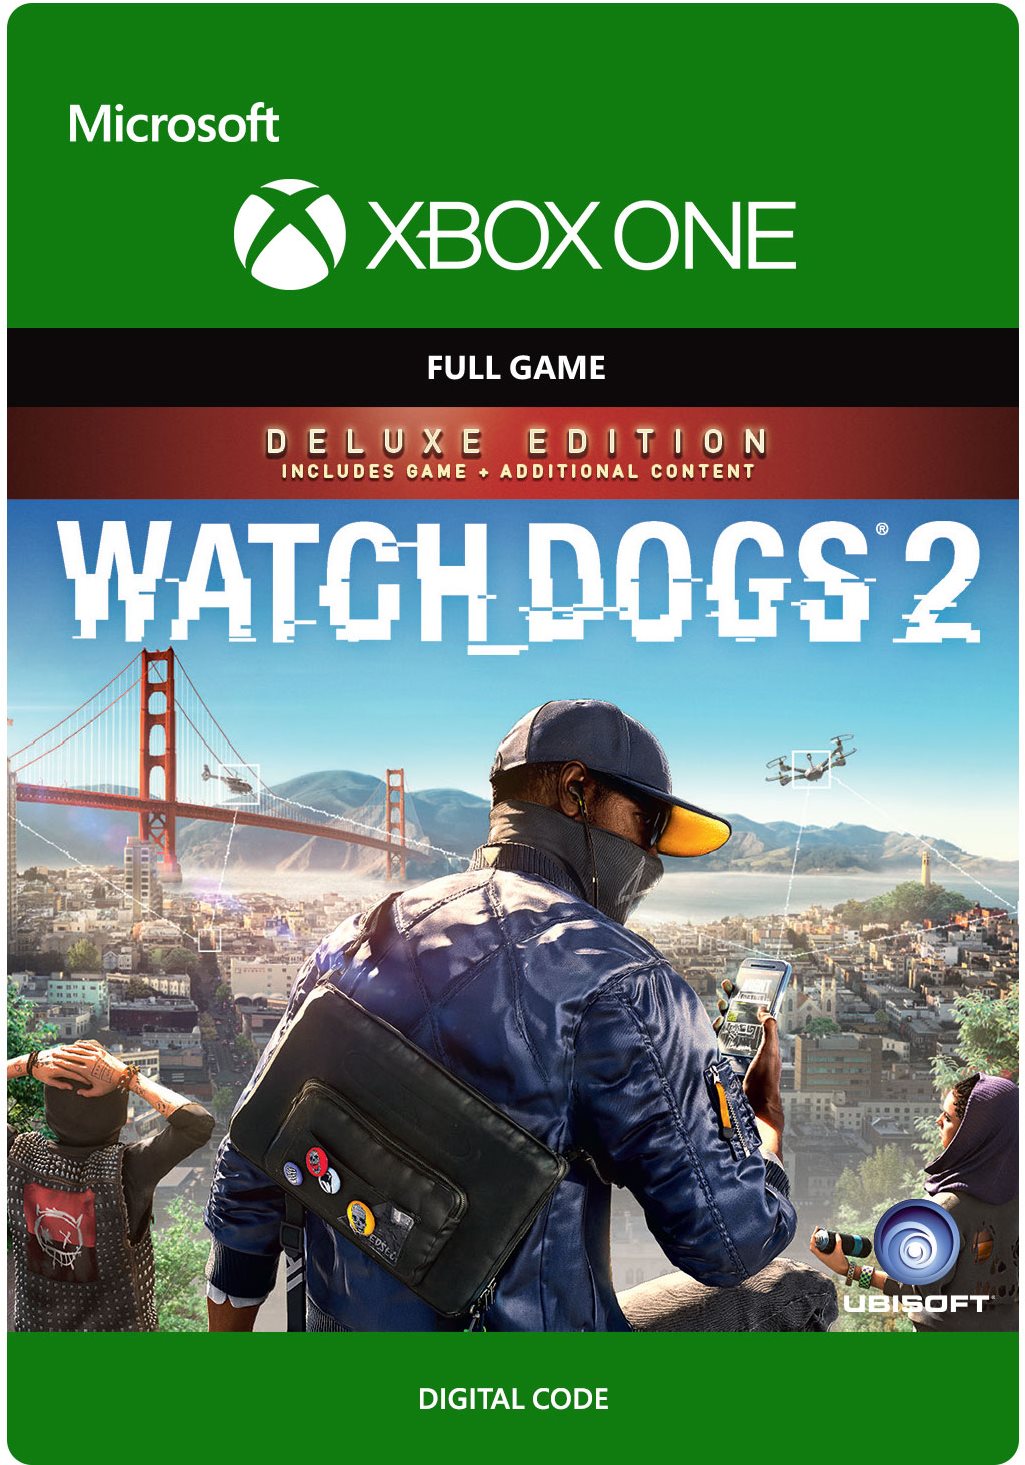 Watch Dogs 2 Deluxe - Xbox One DIGITAL